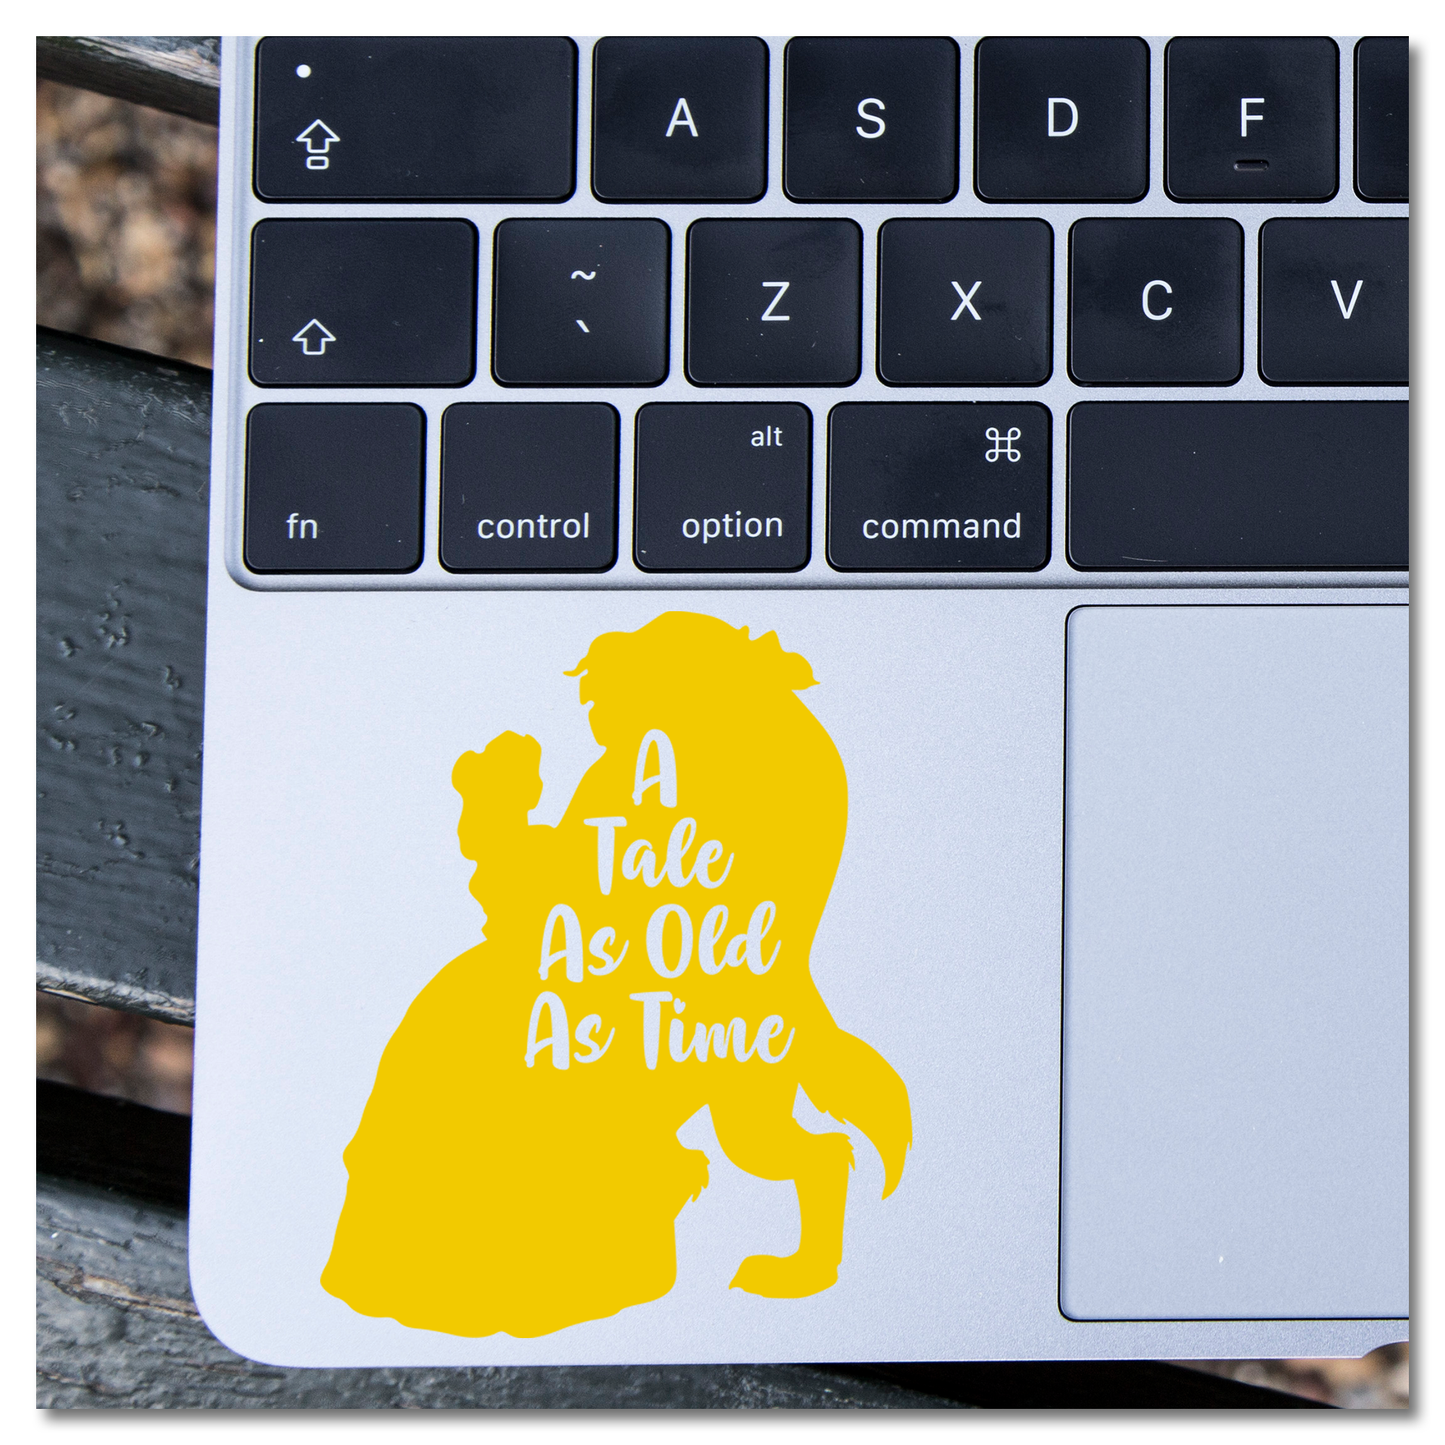 Disney Beauty & The Beast A Tale As Old As Time Vinyl Decal Sticker